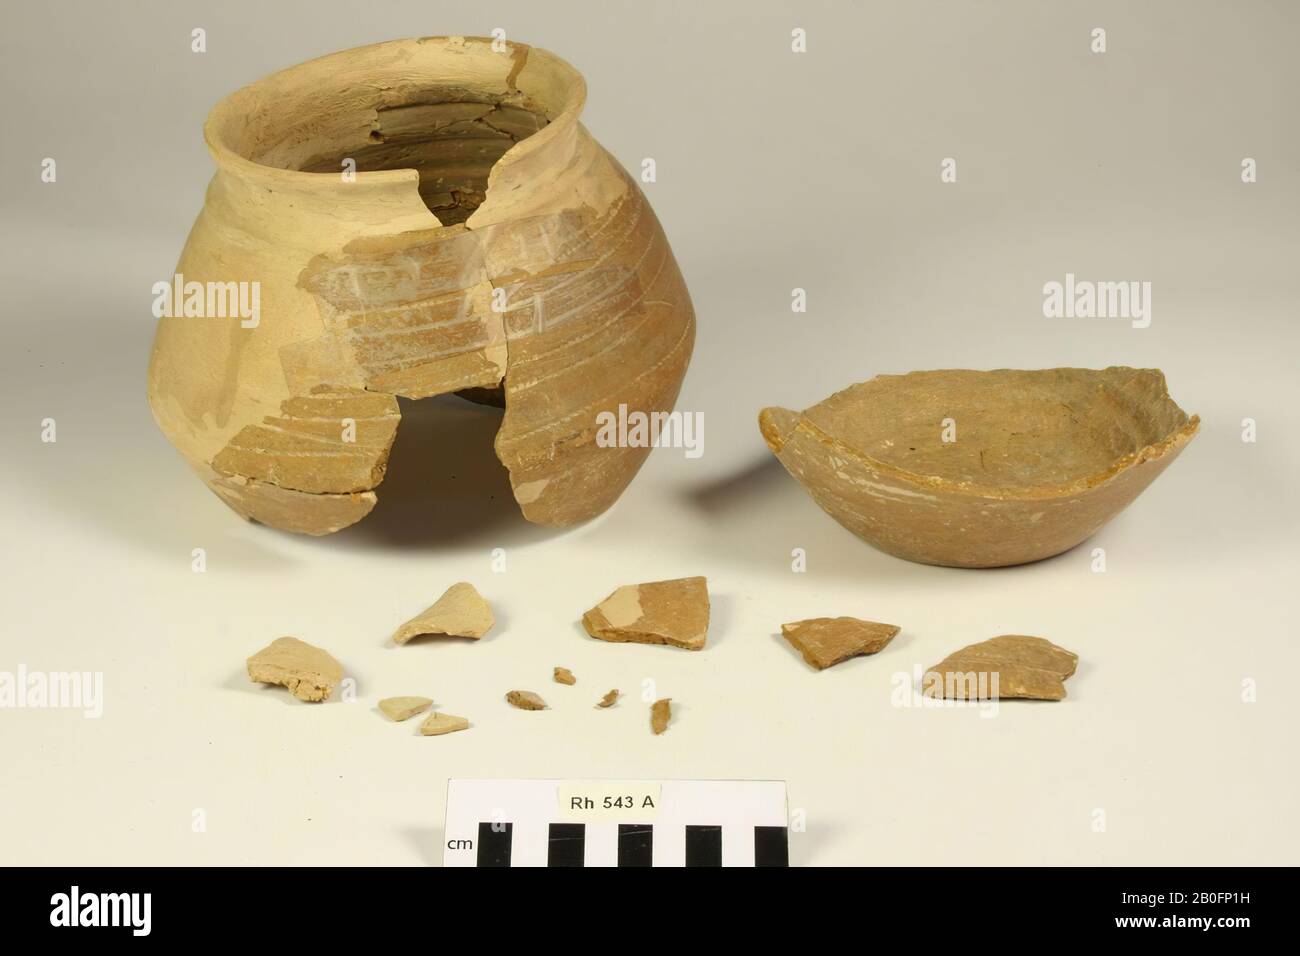 Knikpot of smooth-walled, Frankish earthenware with wheel mark decoration. Old bondings and additions, loose soil, 4 loose fragments and 5 chips, pot is plastered with pieces of tape, kink, pottery (smooth wall) (Frankish), h: 16.3 cm, diam: 22 cm, vmeb, Netherlands, Utrecht, Rhenen, Rhenen, grave 543 Stock Photo